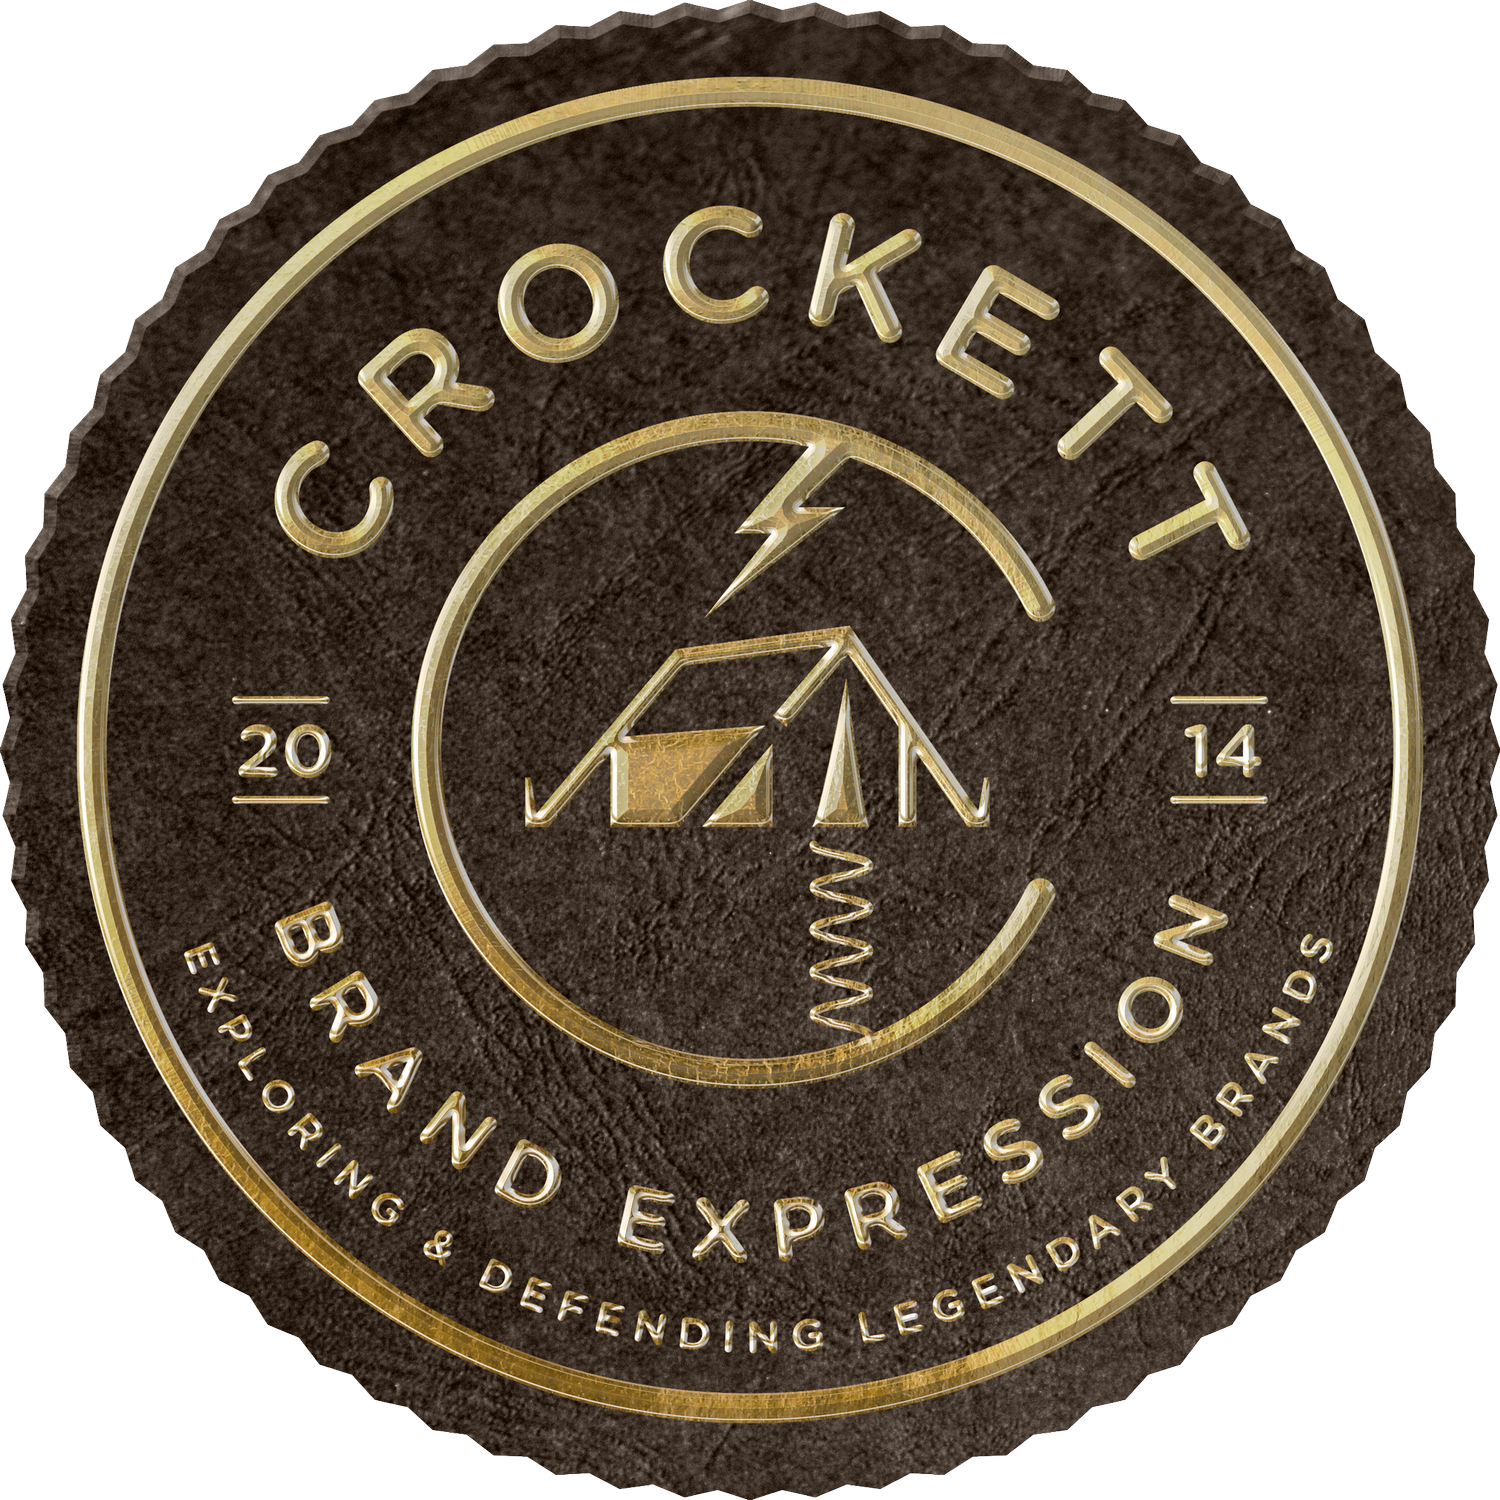 Forge a Legacy: Brand Identity & Brand Expression with Crockett